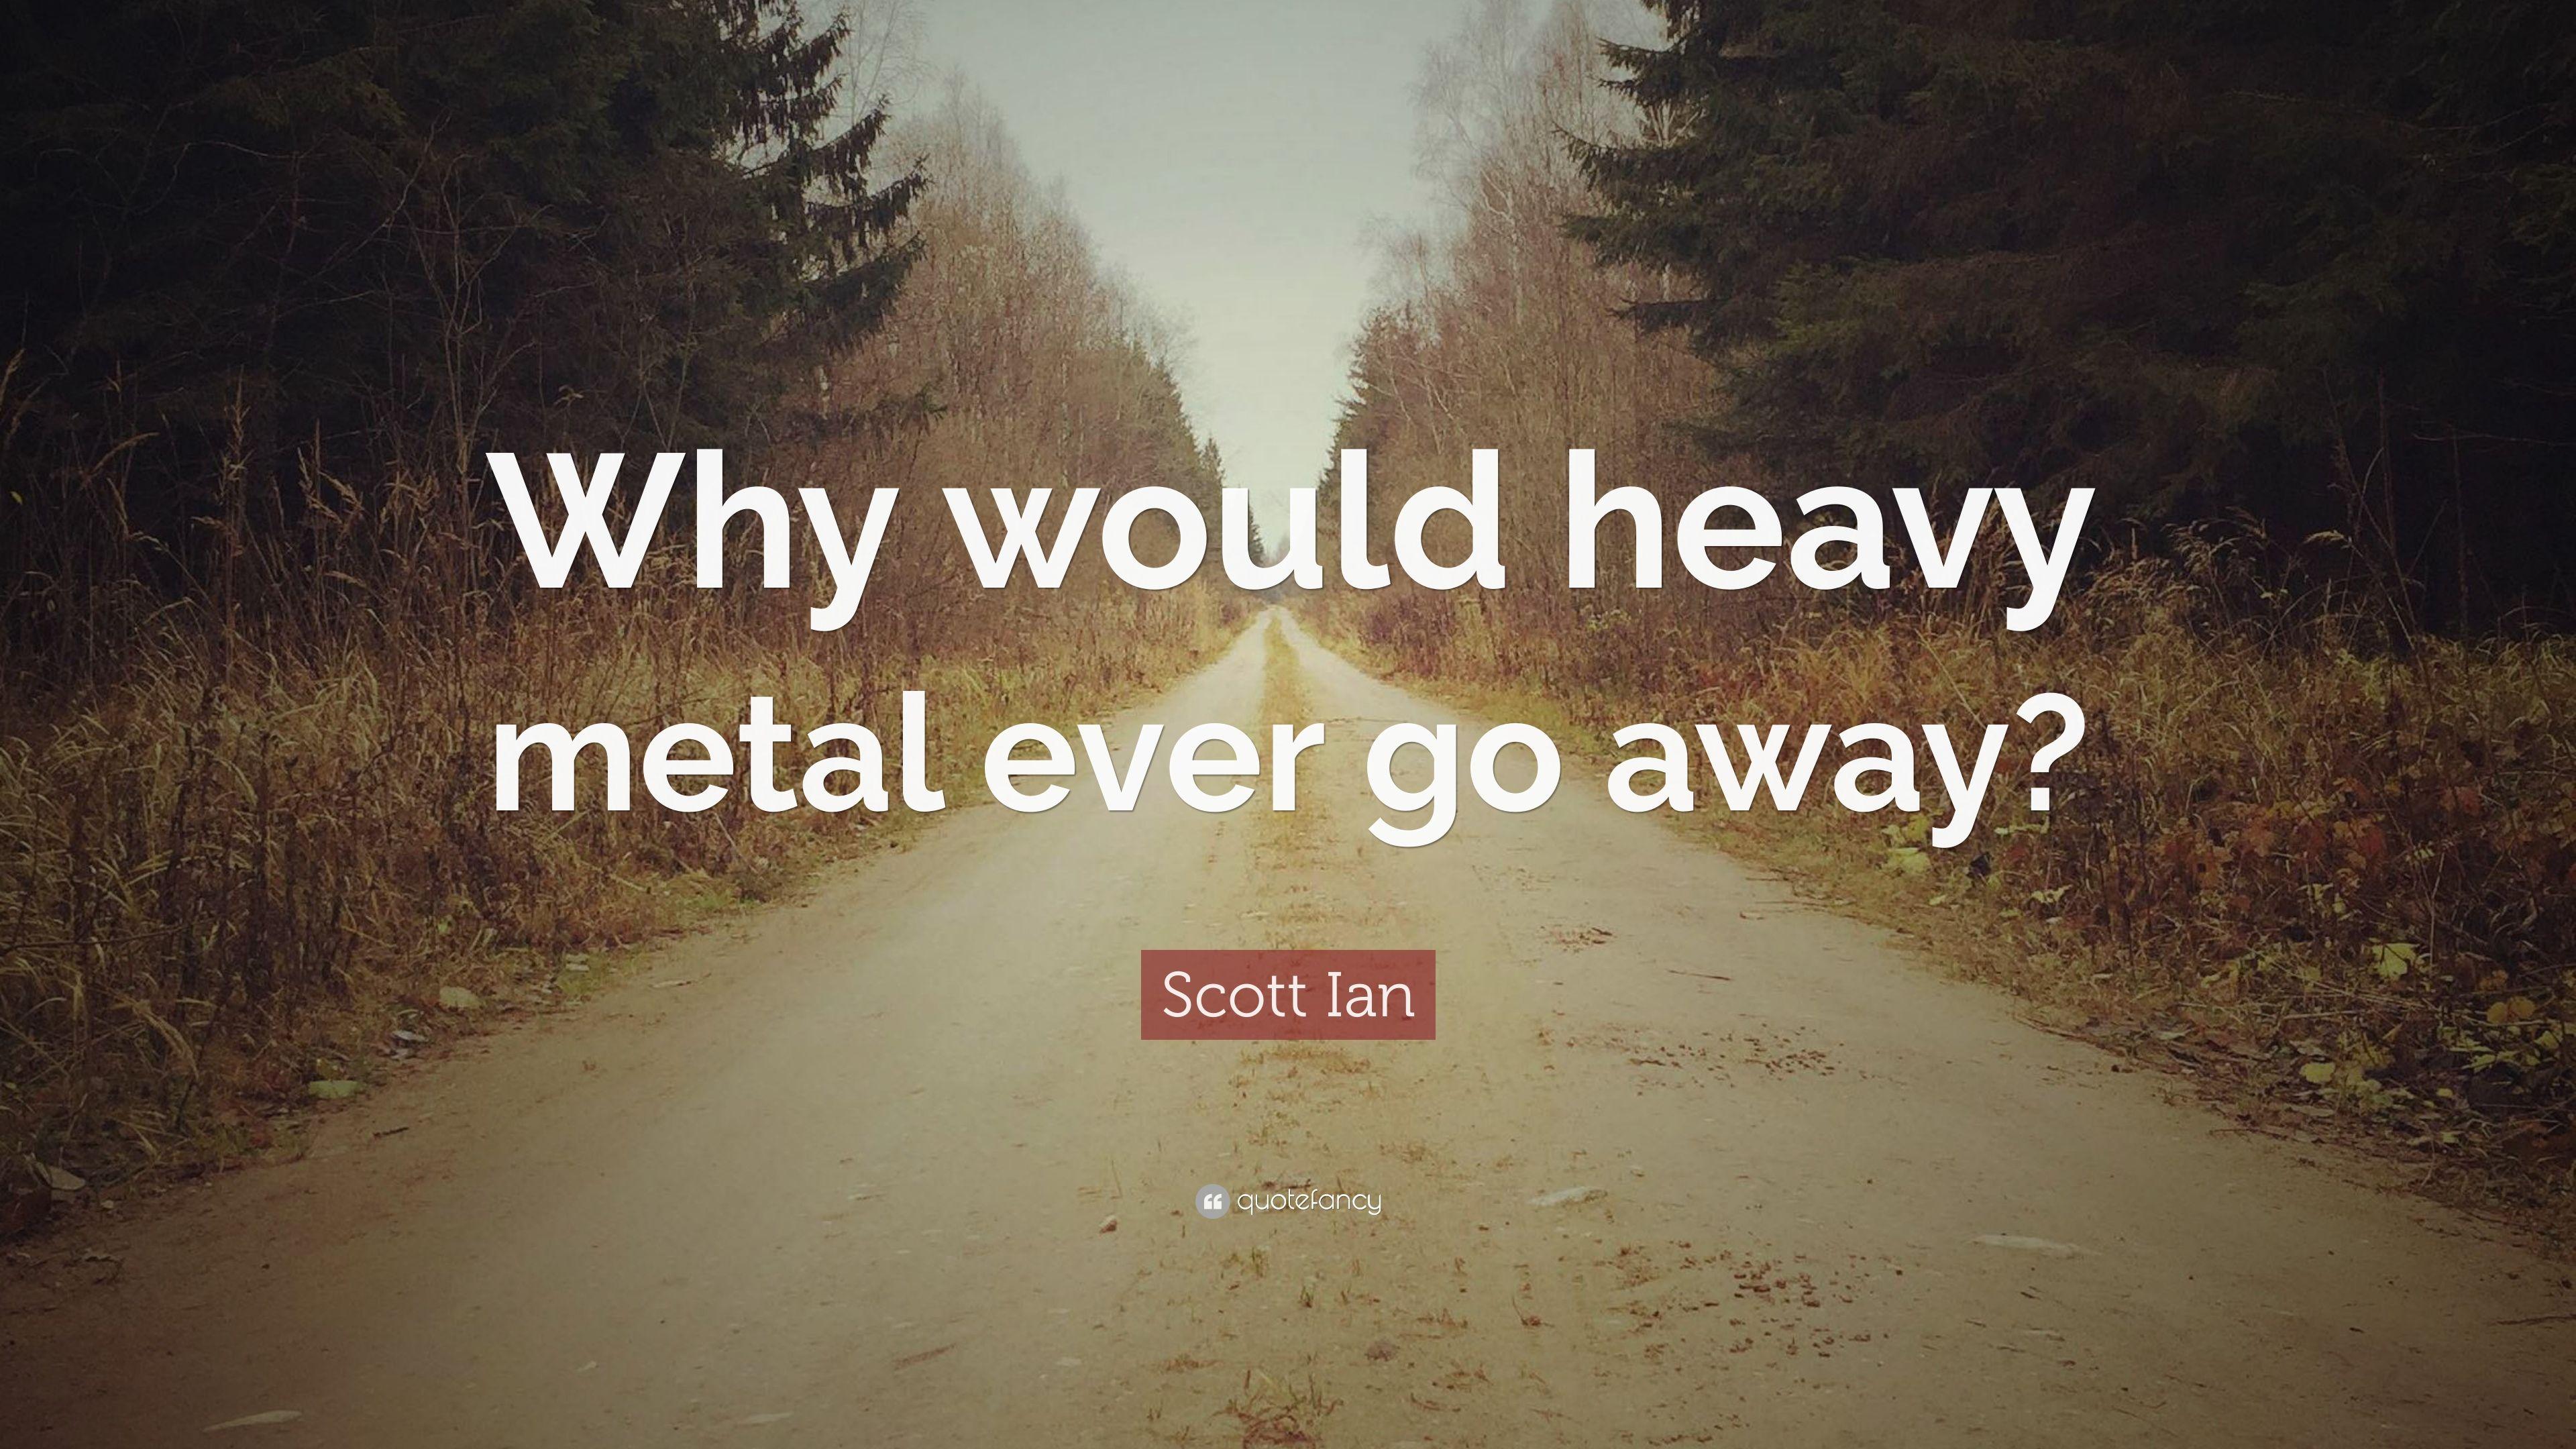 Scott Ian Quote: “Why would heavy metal ever go away?” 7